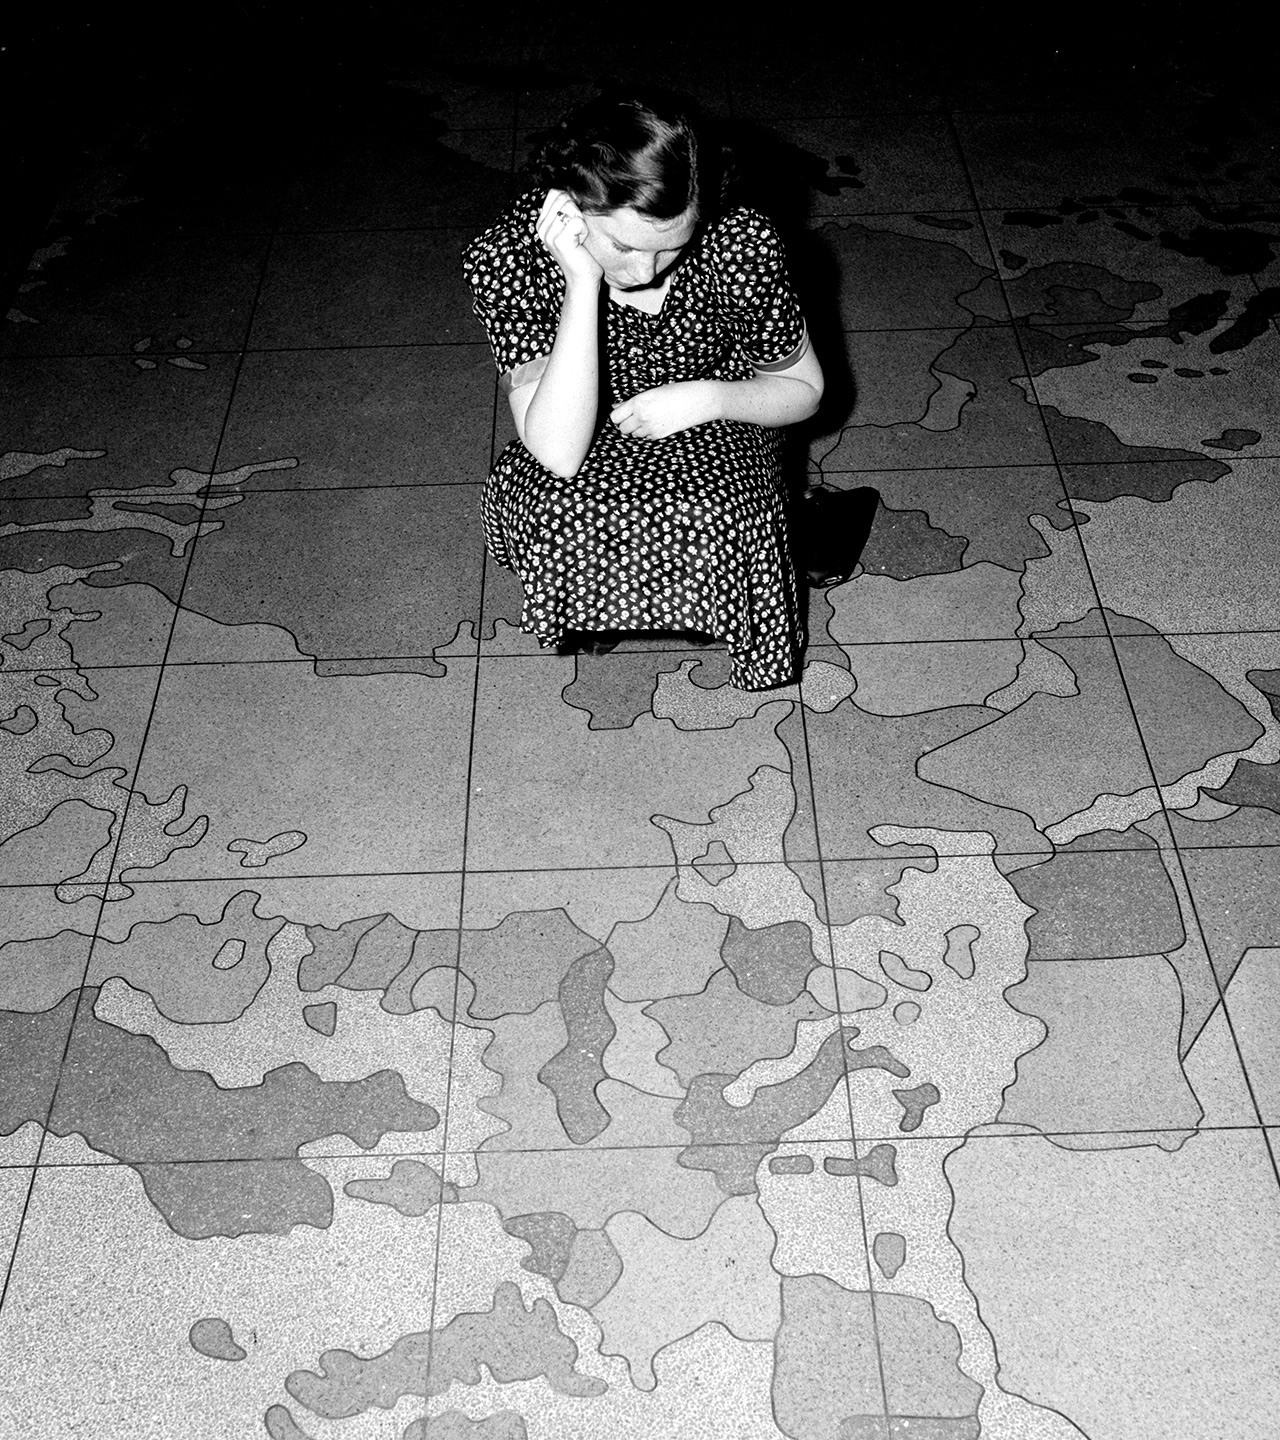 European situation spoils map on Post Office department floor. Washington, D.C., April 12. The huge map on the floor of the Post Office Department here is all out of kilter these days due to the aggression in Europe. Many are the embarrassing questions being asked officials about when Mr. Farley is going to do something about Ethiopia, Austria and Czechoslovakia. The answer so far has been - nothing. Probably the Post Office is waiting to see what will happen next on the continent. Miss Edna Strain is inspecting the damage done by the ambitious dictators. 4-12-39